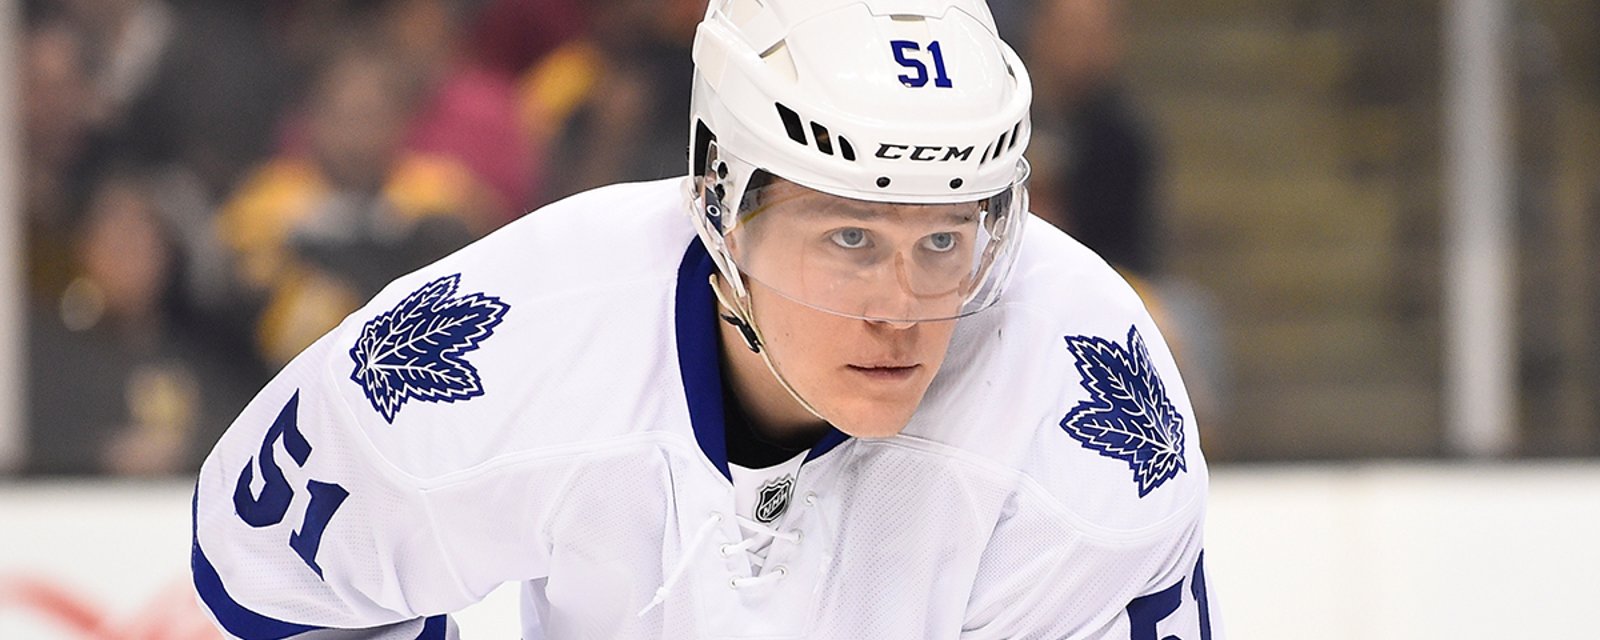 Leafs’ Gardiner eyeing the “JVR” route in free agency. Trade to come?